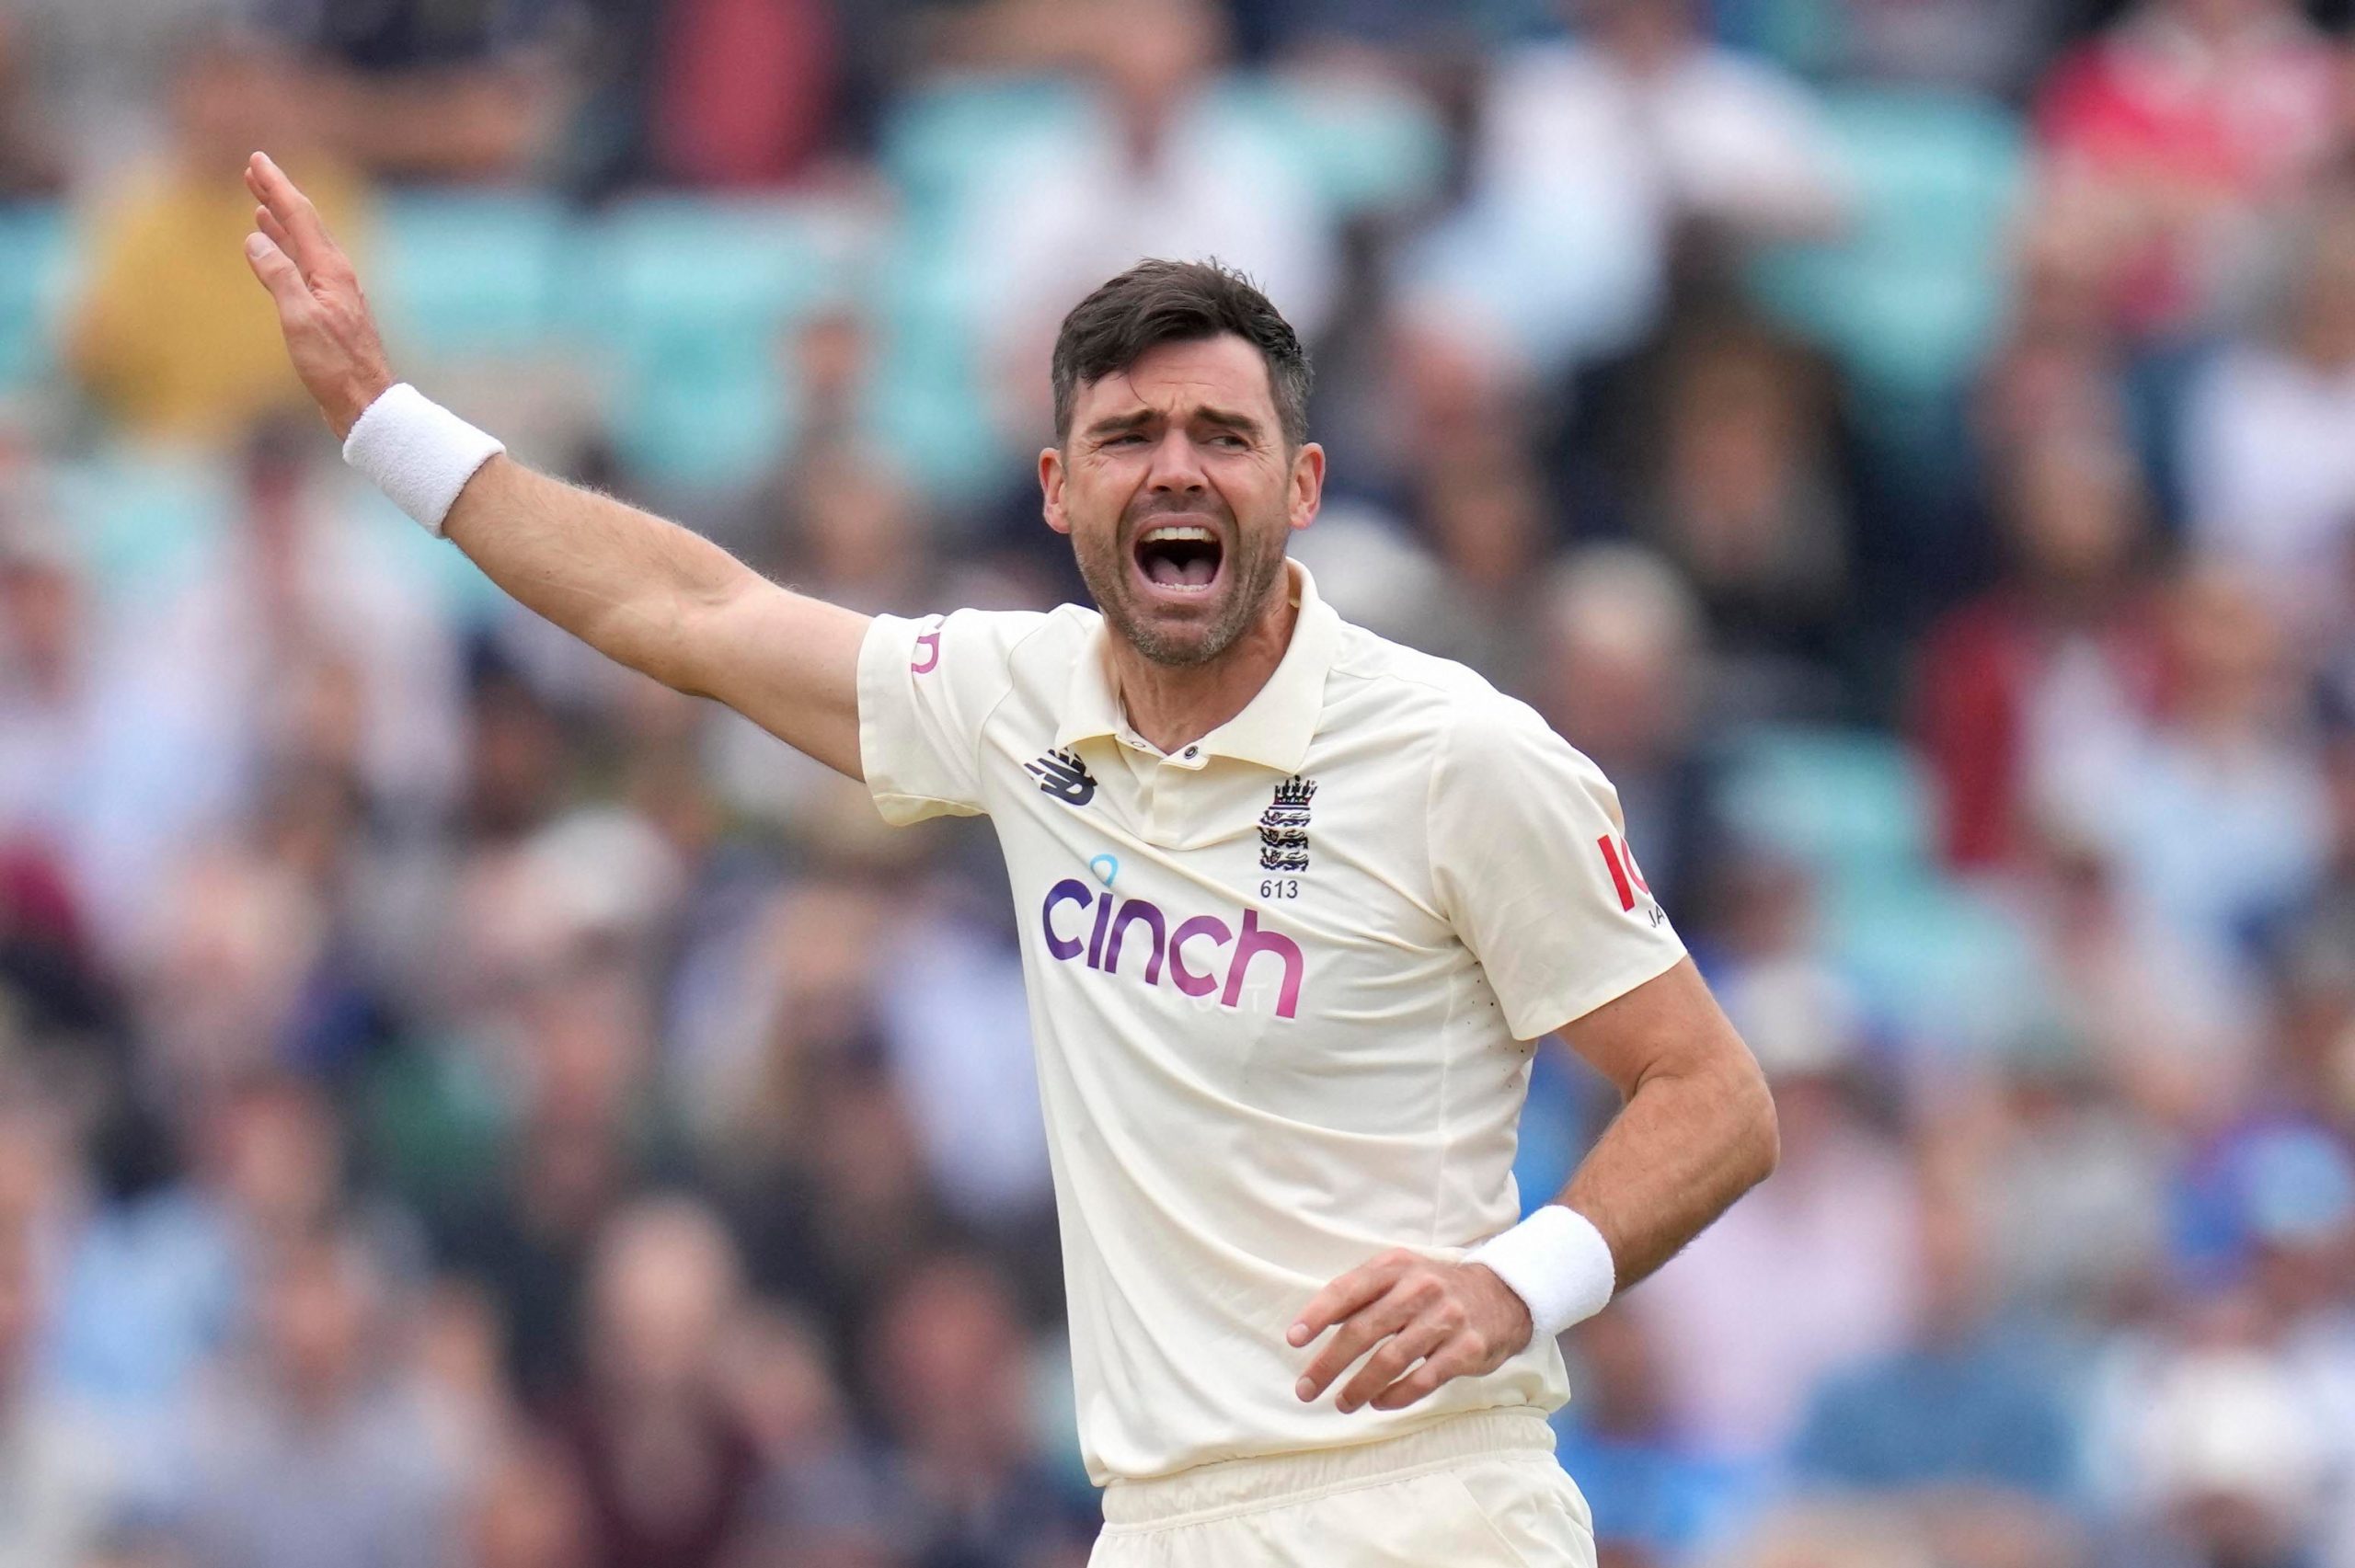 Anderson has ‘stopped trying to make sense of’ being dropped from England’s Test team